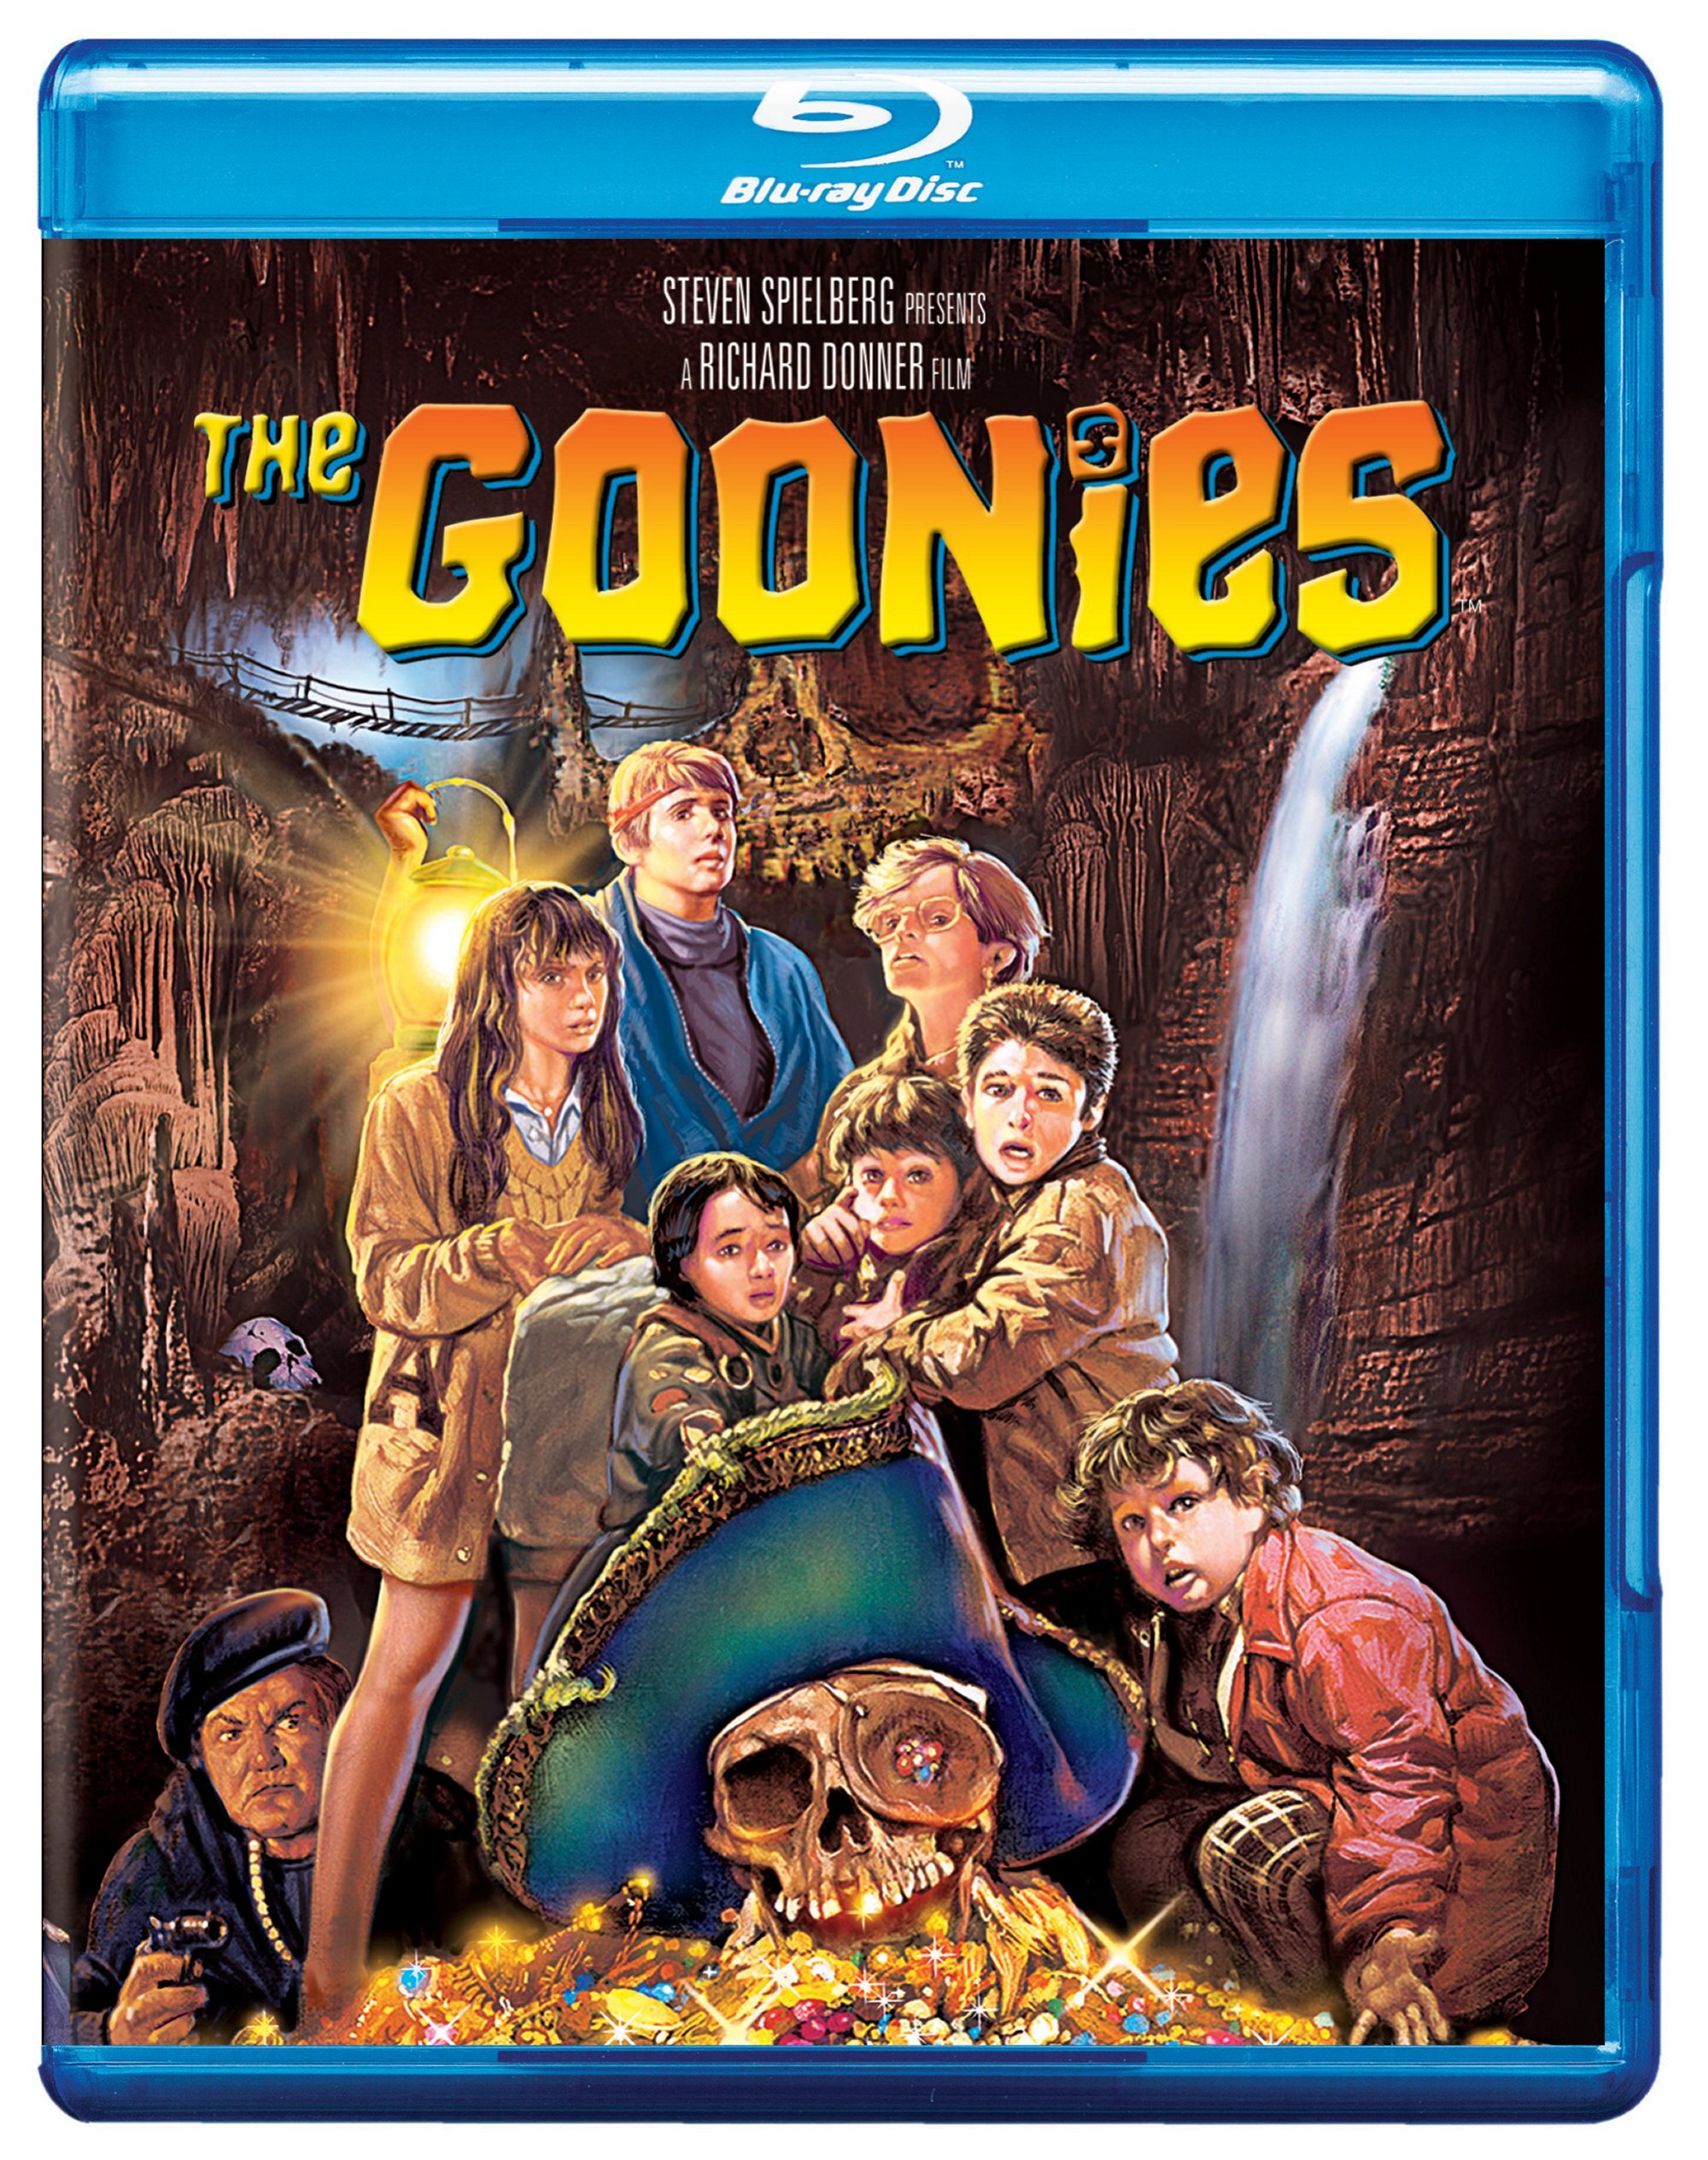 DVDFr - Années 1980 - 4 films collection : Les Goonies + Gremlins +  Beetlejuice + Ready Player One (4K Ultra HD + Blu-ray) - 4K UHD